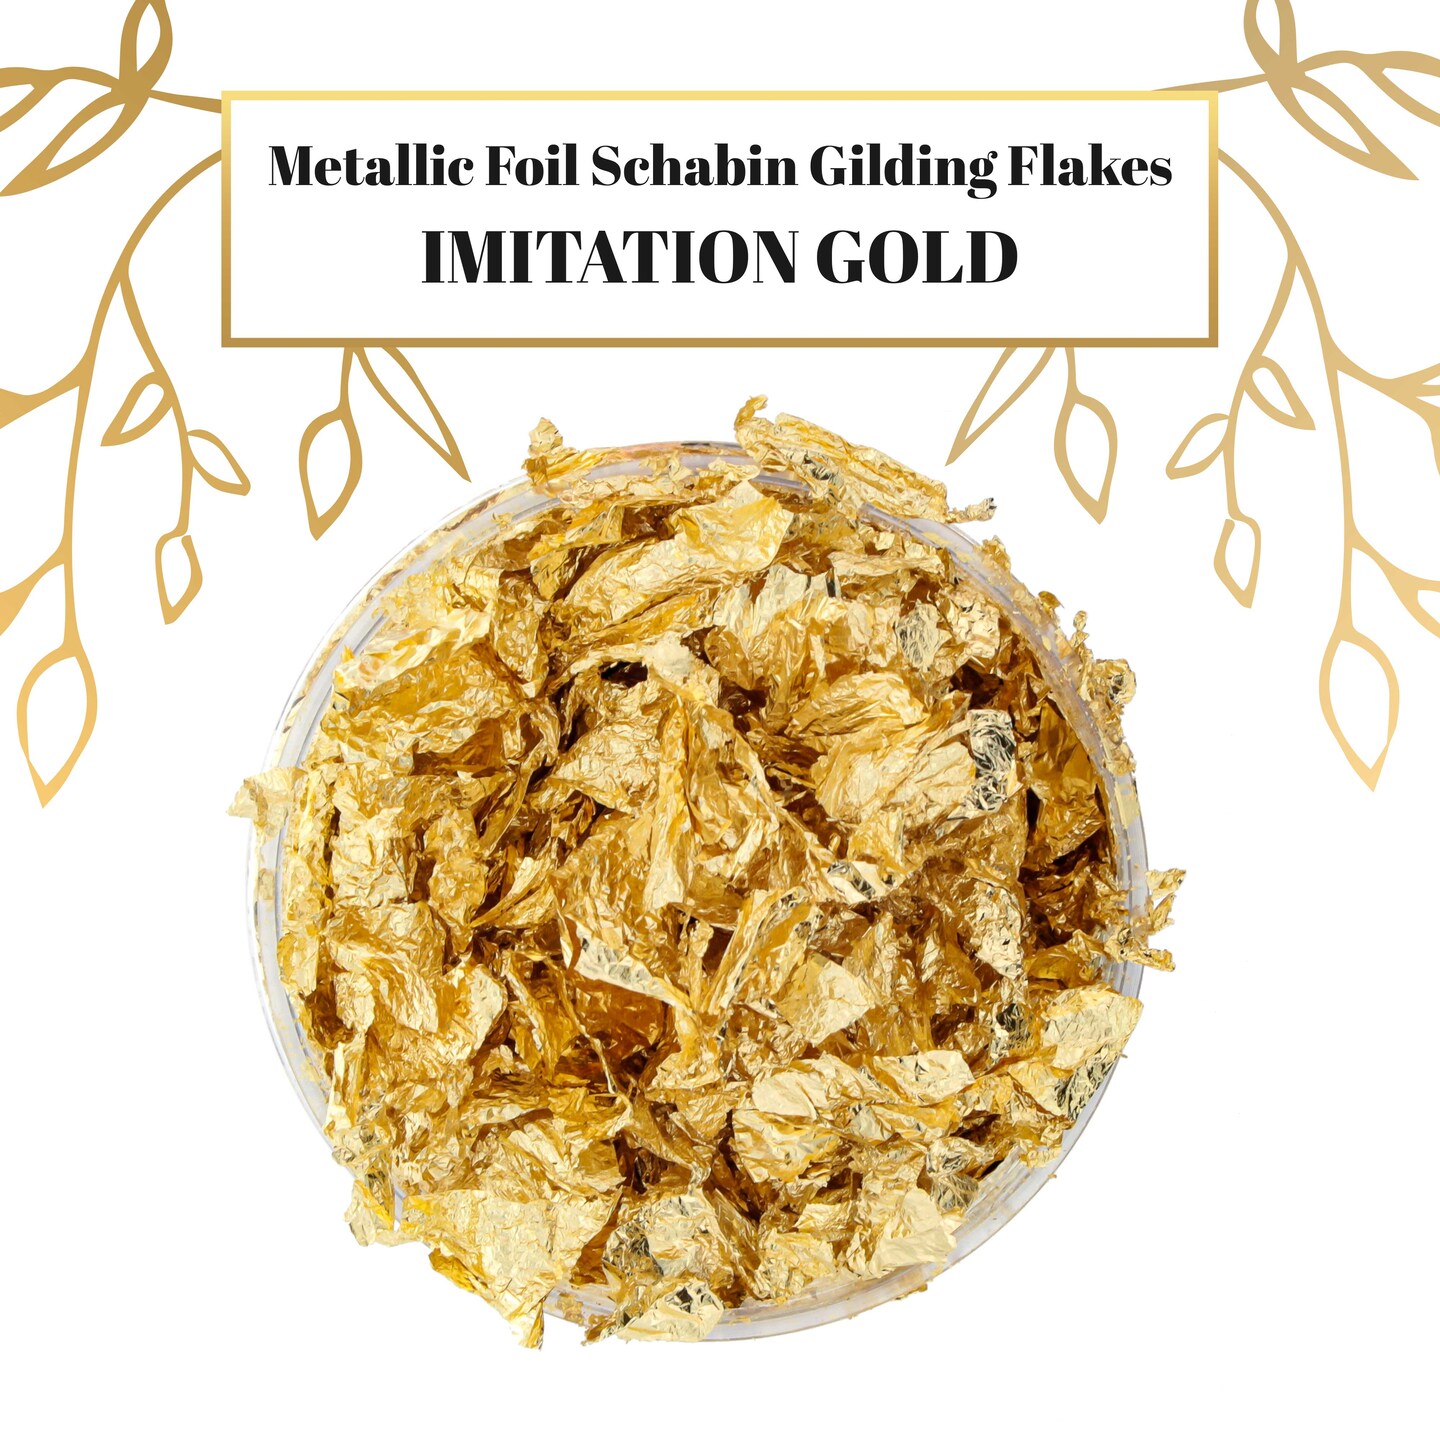 UNIQUE GOLD LEAFING STUDIO 3g Gold & Silver Leaf Gilding Gold Metallic Foil  Flakes for Nail,Resin Art - 3g Gold & Silver Leaf Gilding Gold Metallic  Foil Flakes for Nail,Resin Art .